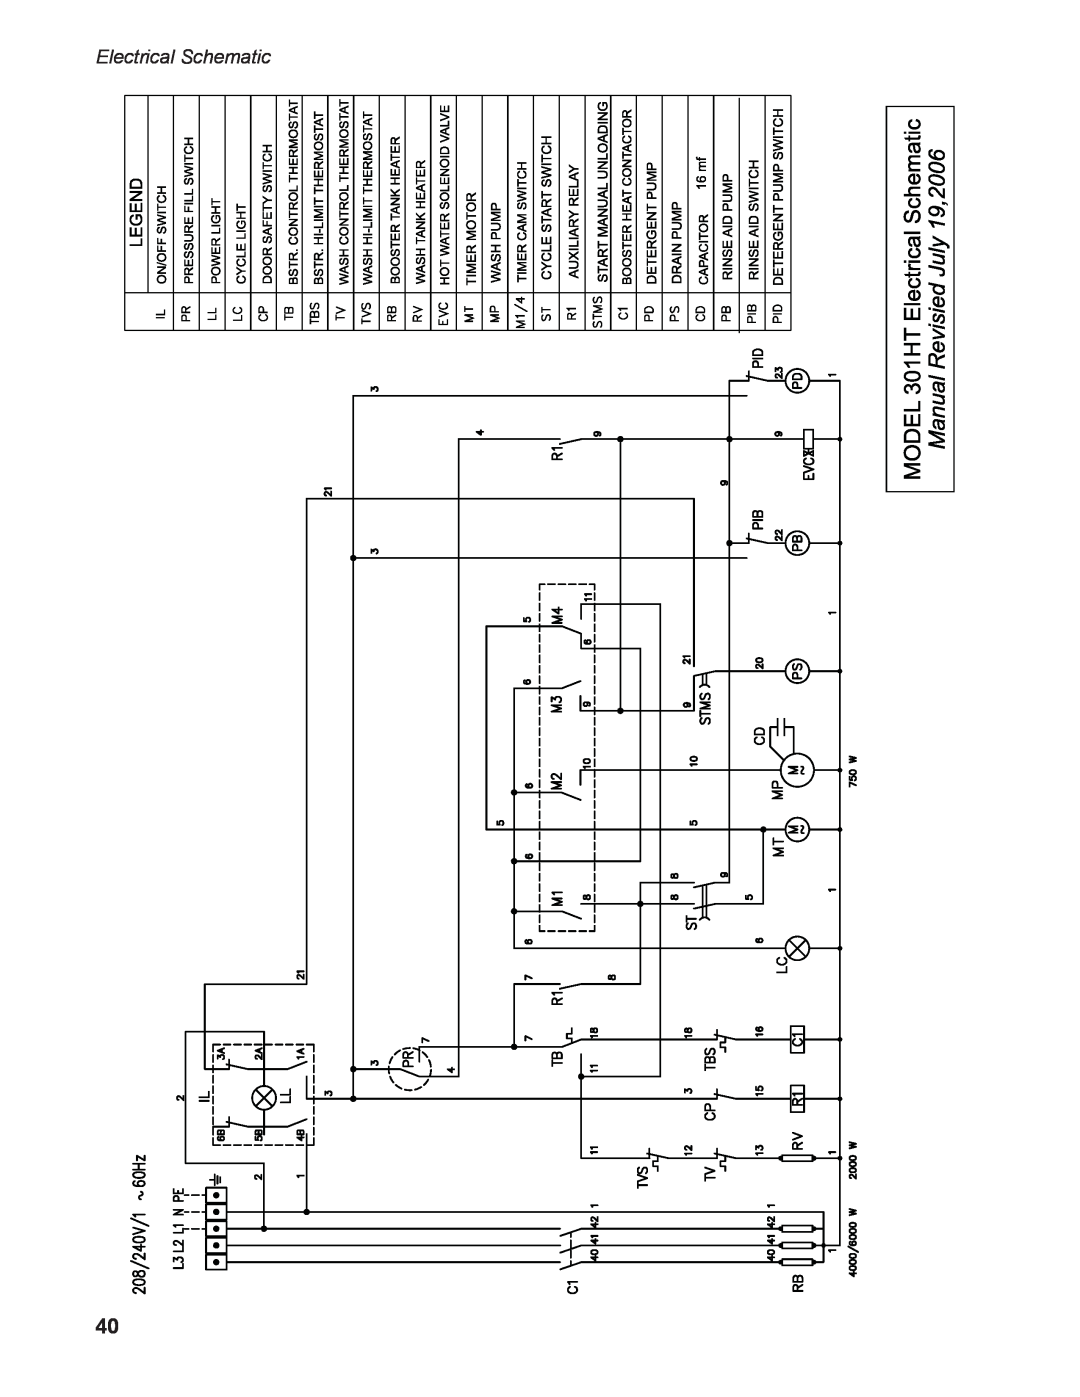 Moyer Diebel 301HT M2 installation manual Electrical Schematic 